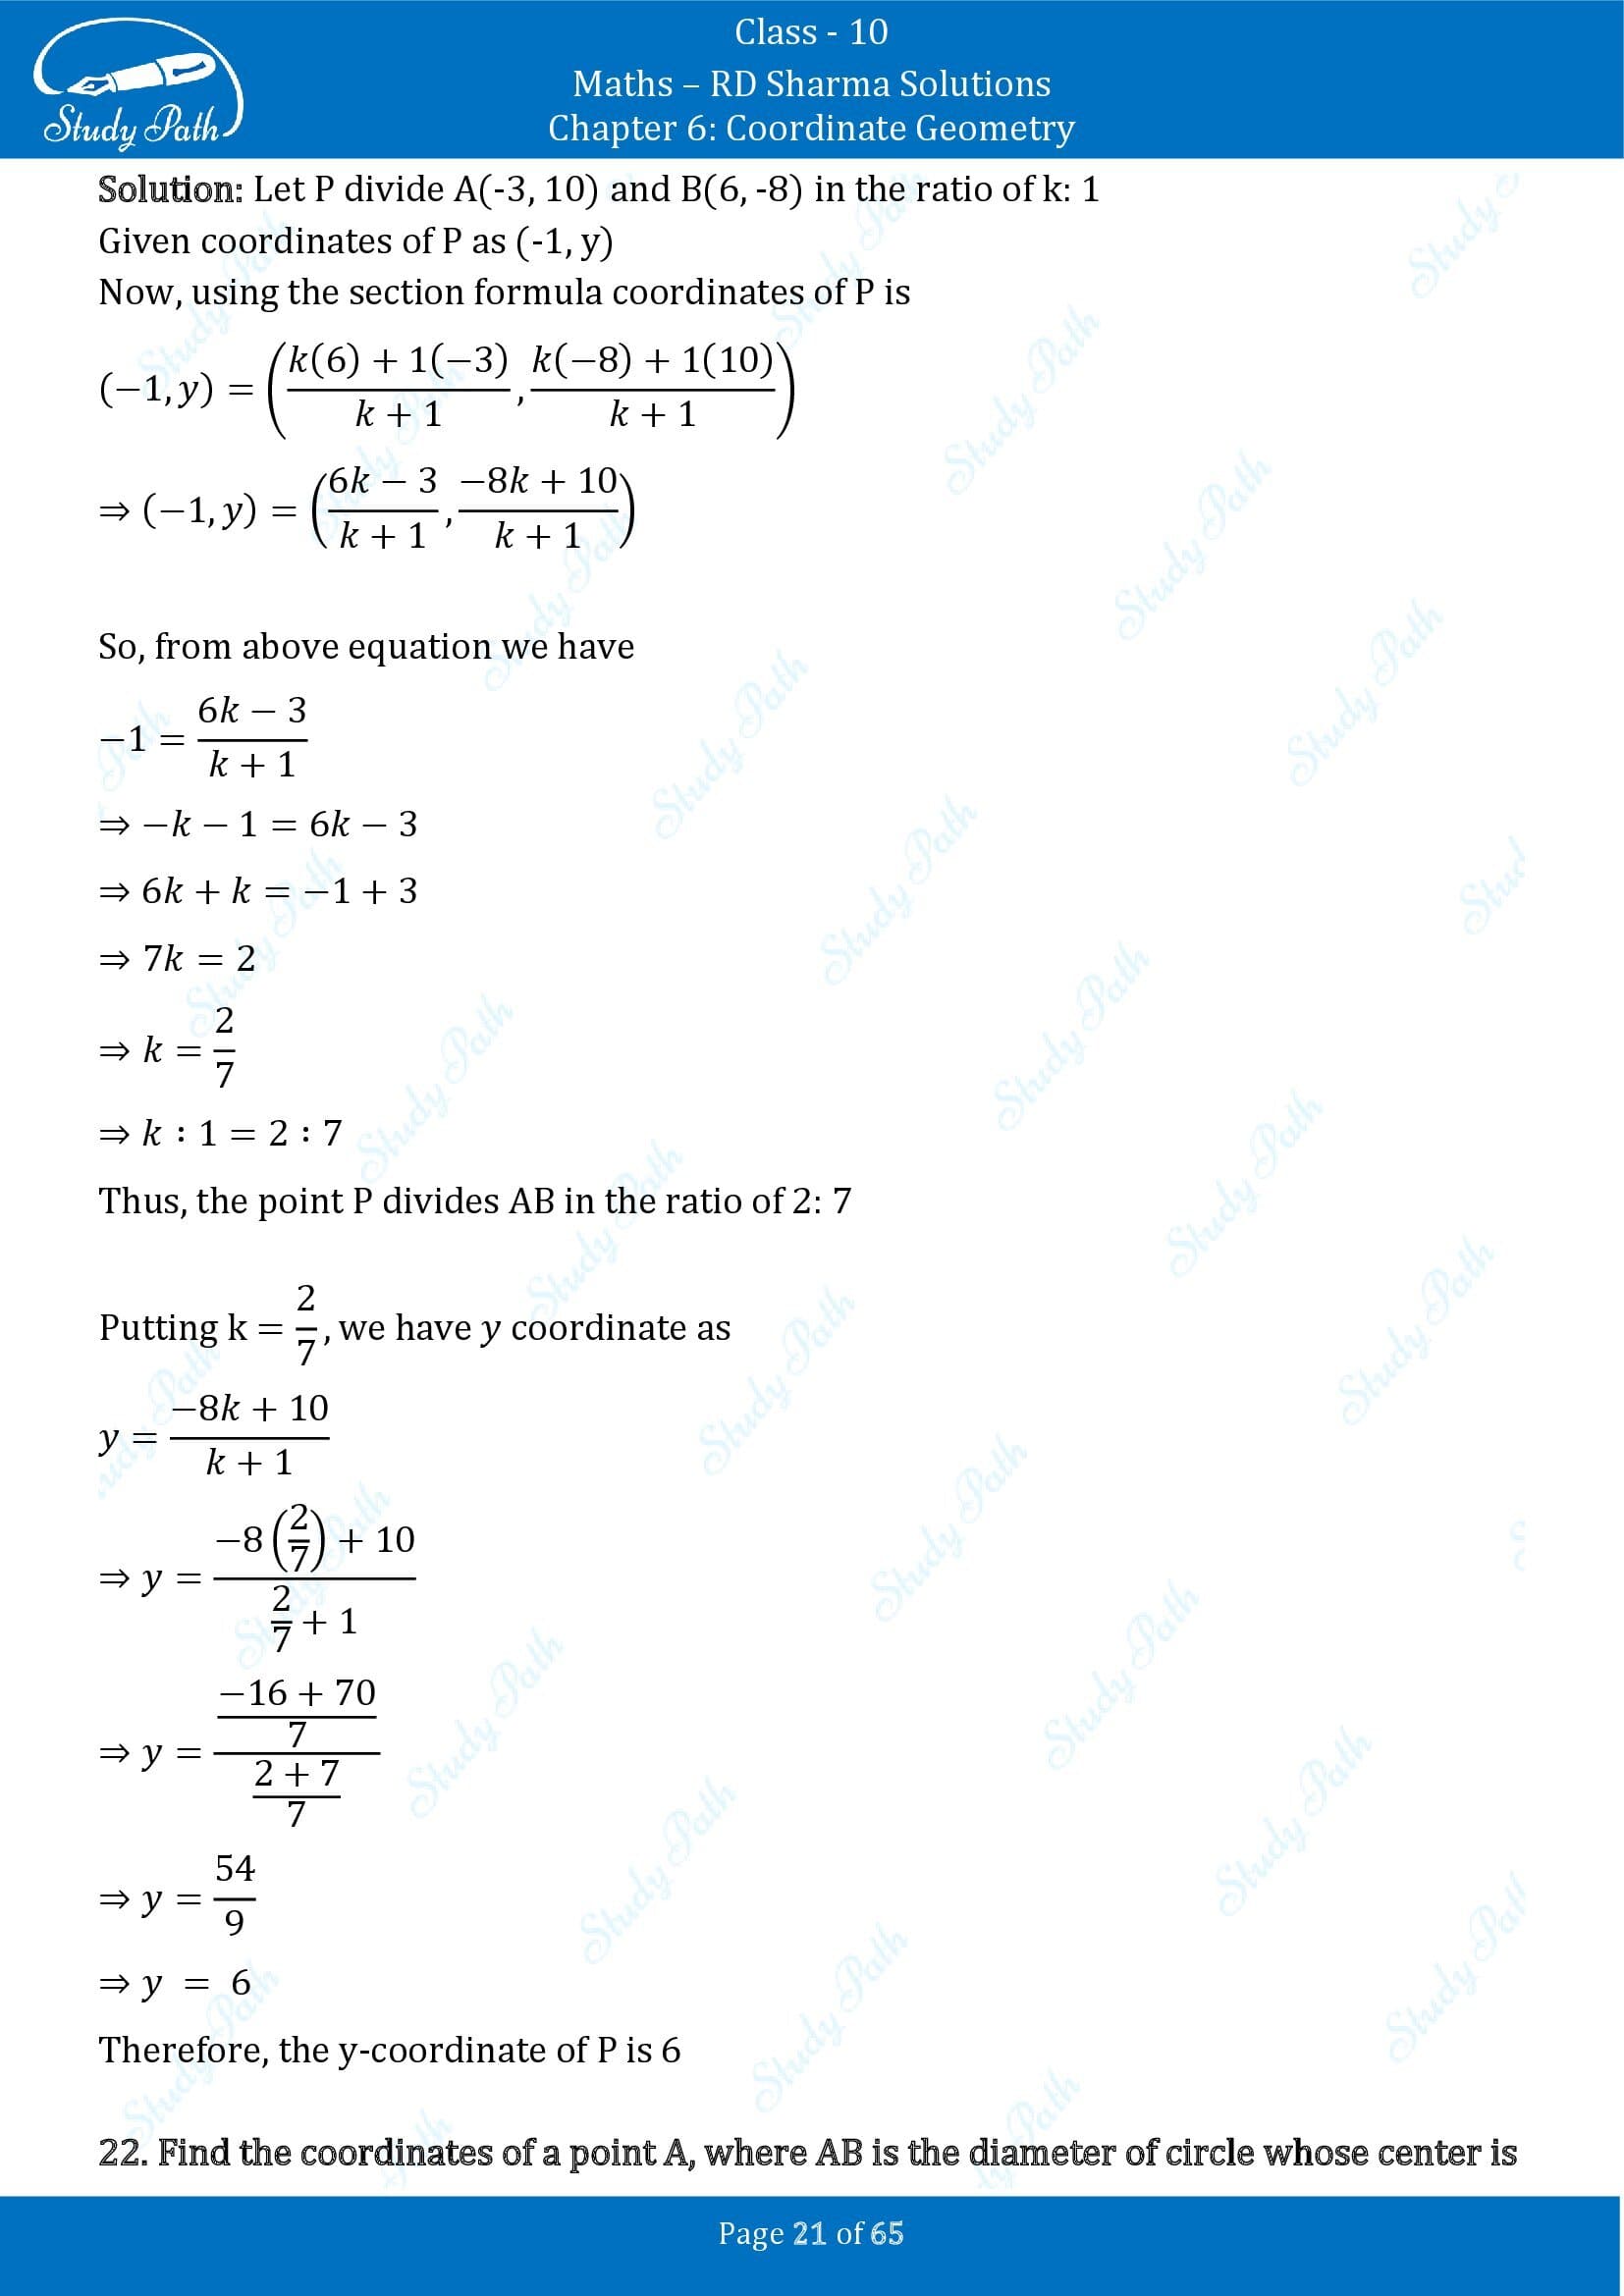 RD Sharma Solutions Class 10 Chapter 6 Coordinate Geometry Exercise 6.3 00021